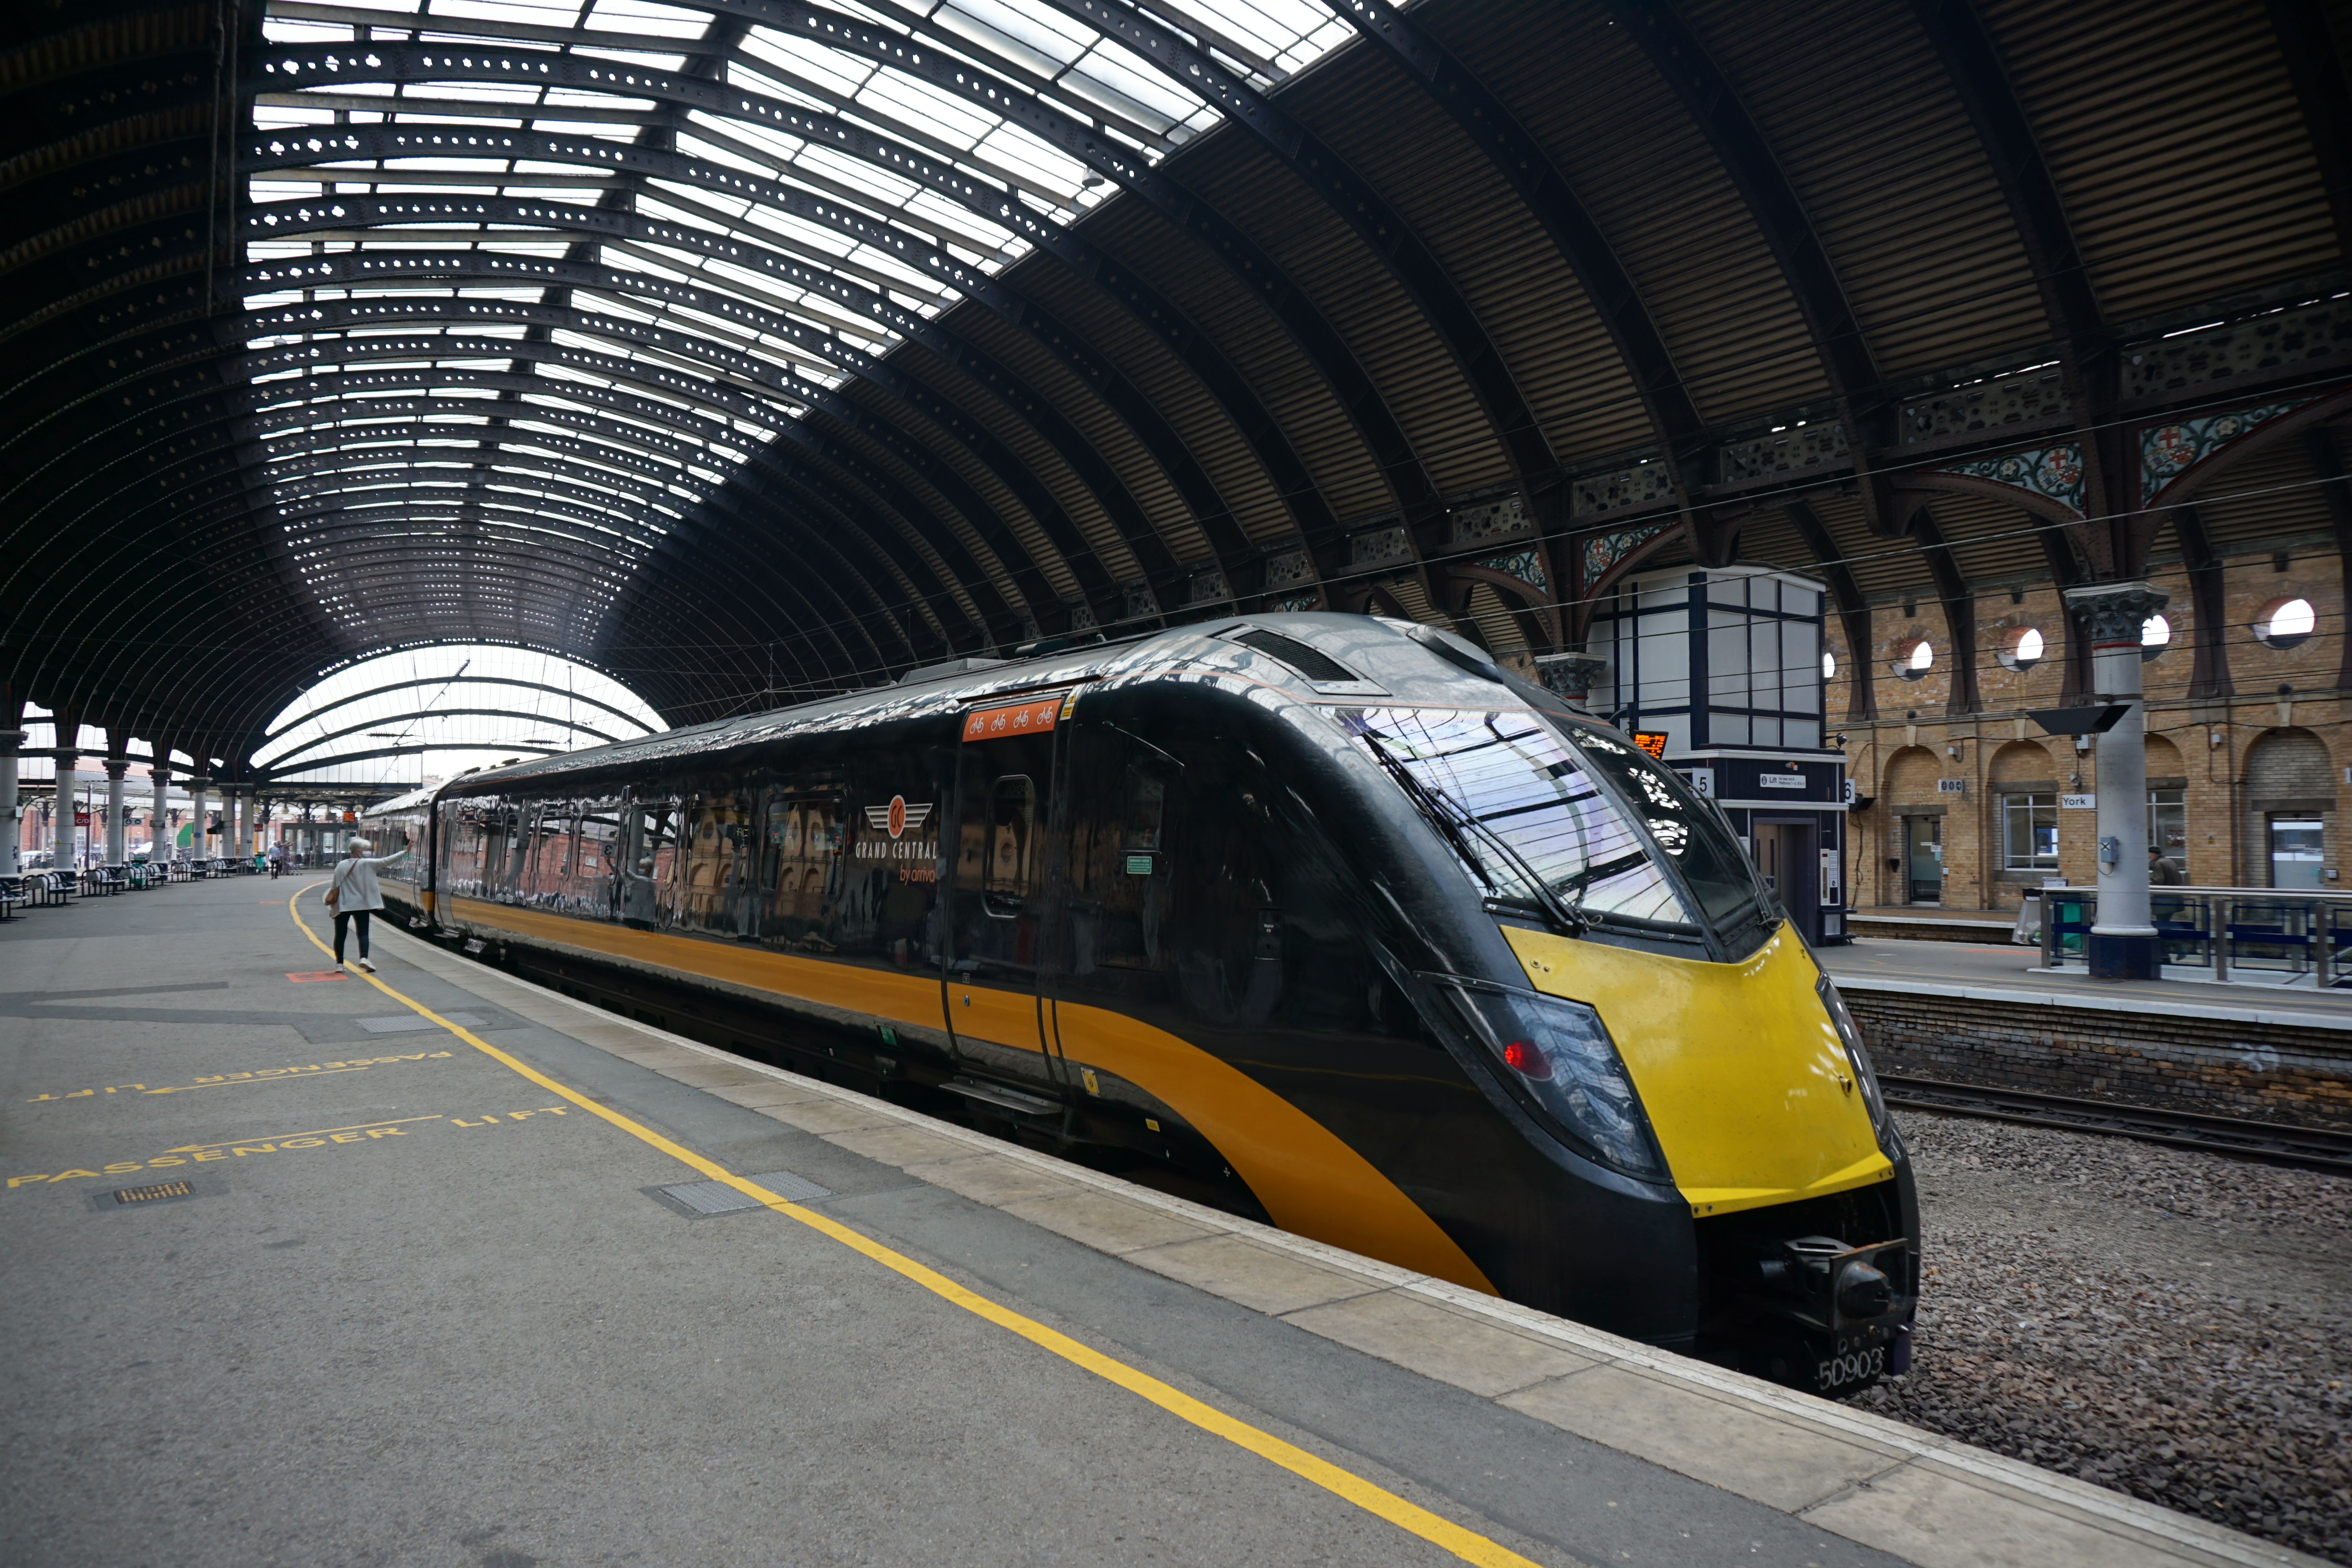 Grand Central train in York Station